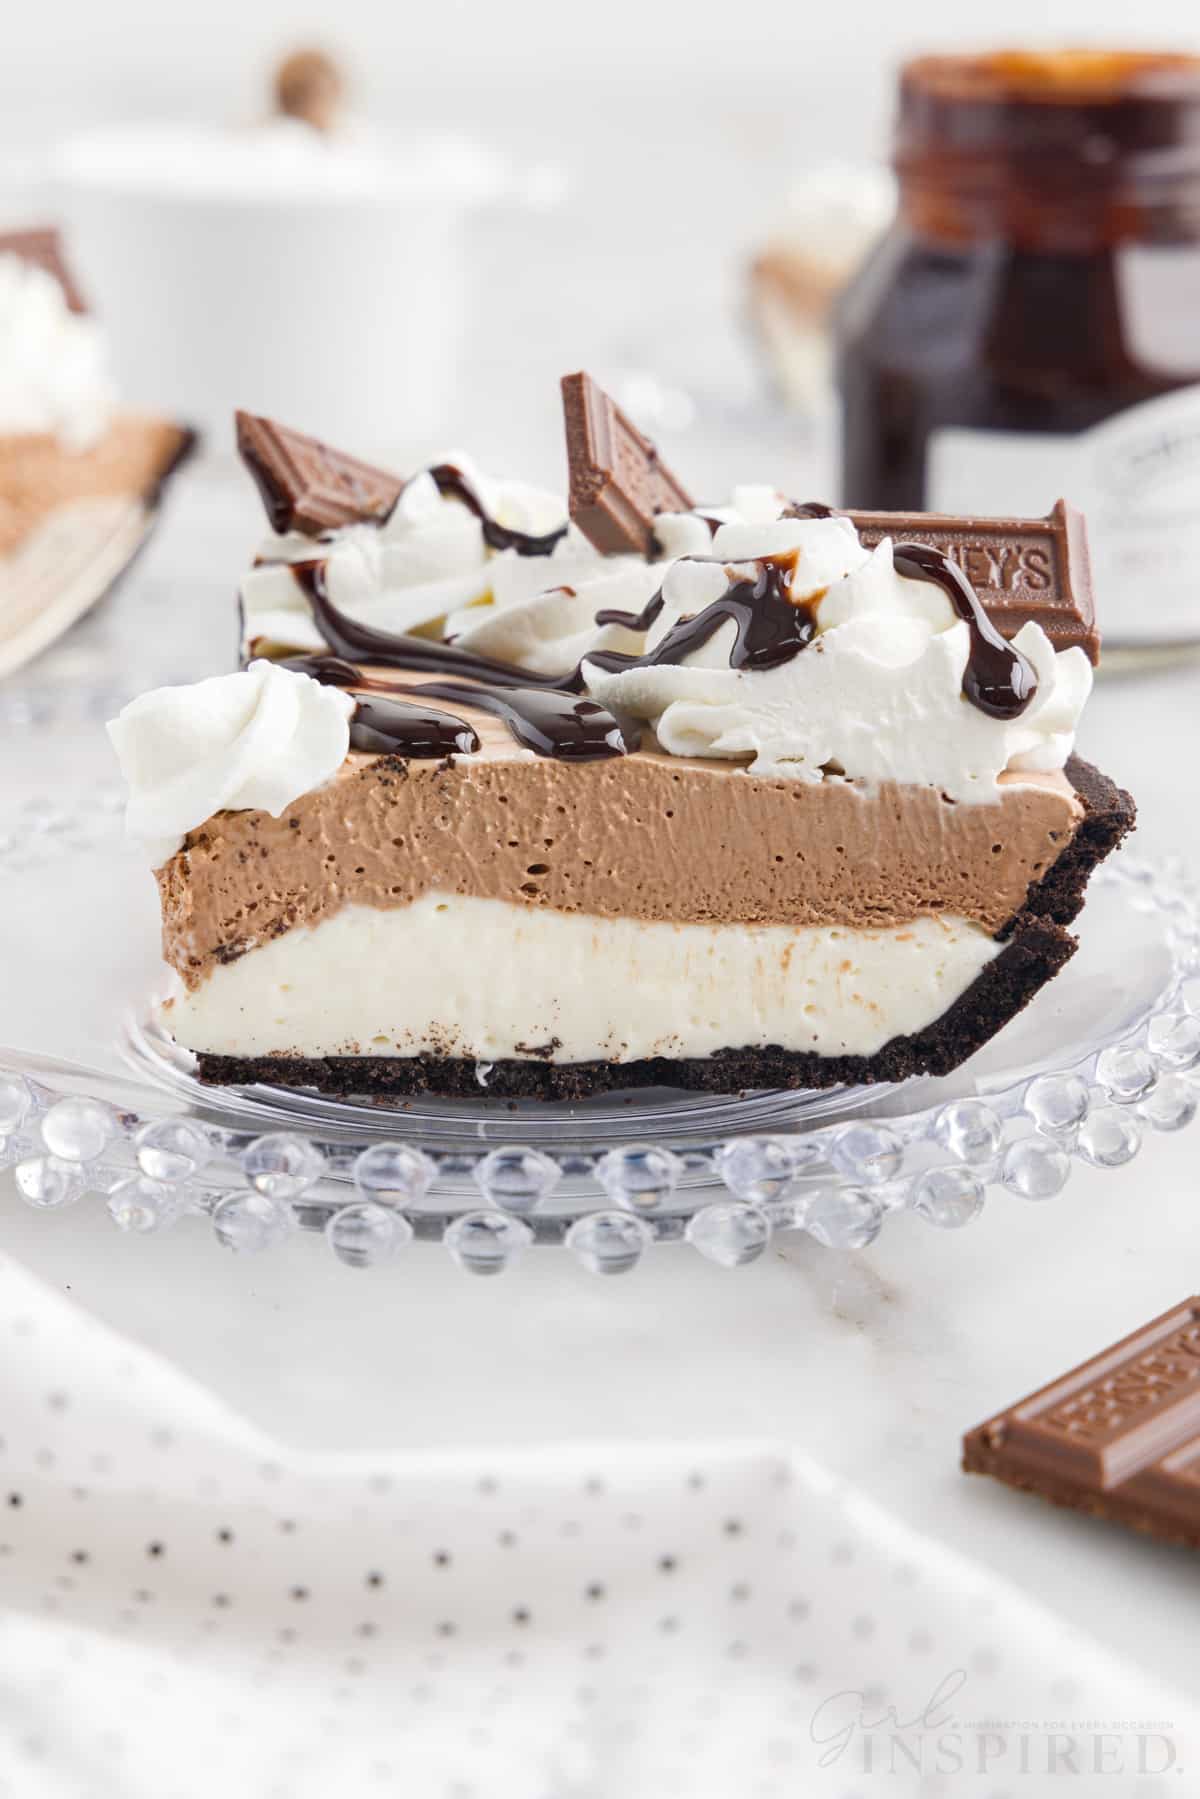 A slice of Hershey Pie on a plate.